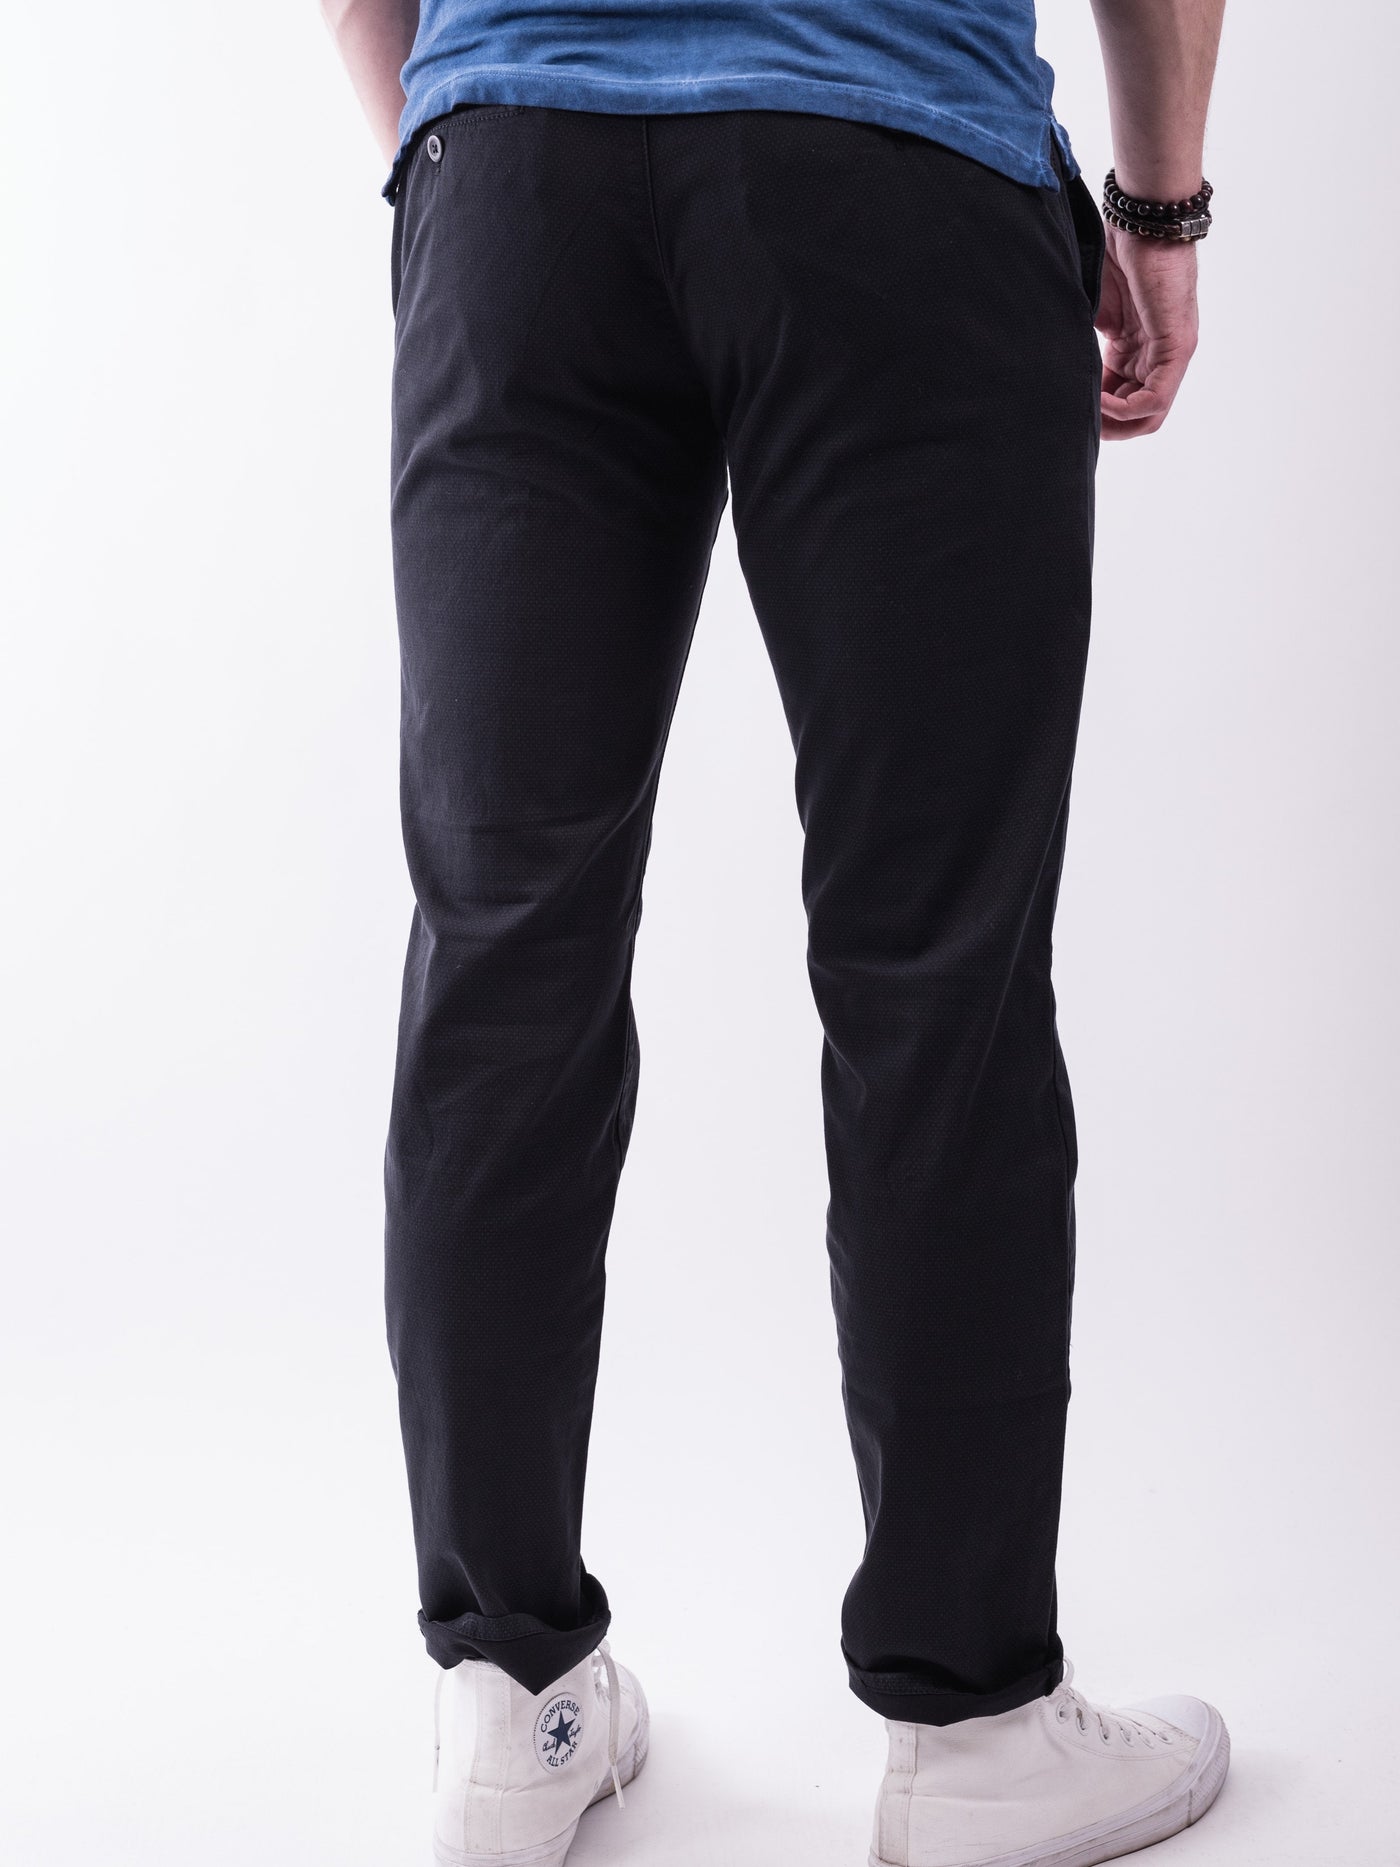 Alberto Modern Fit Stretch Ticknors Men's Clothiers